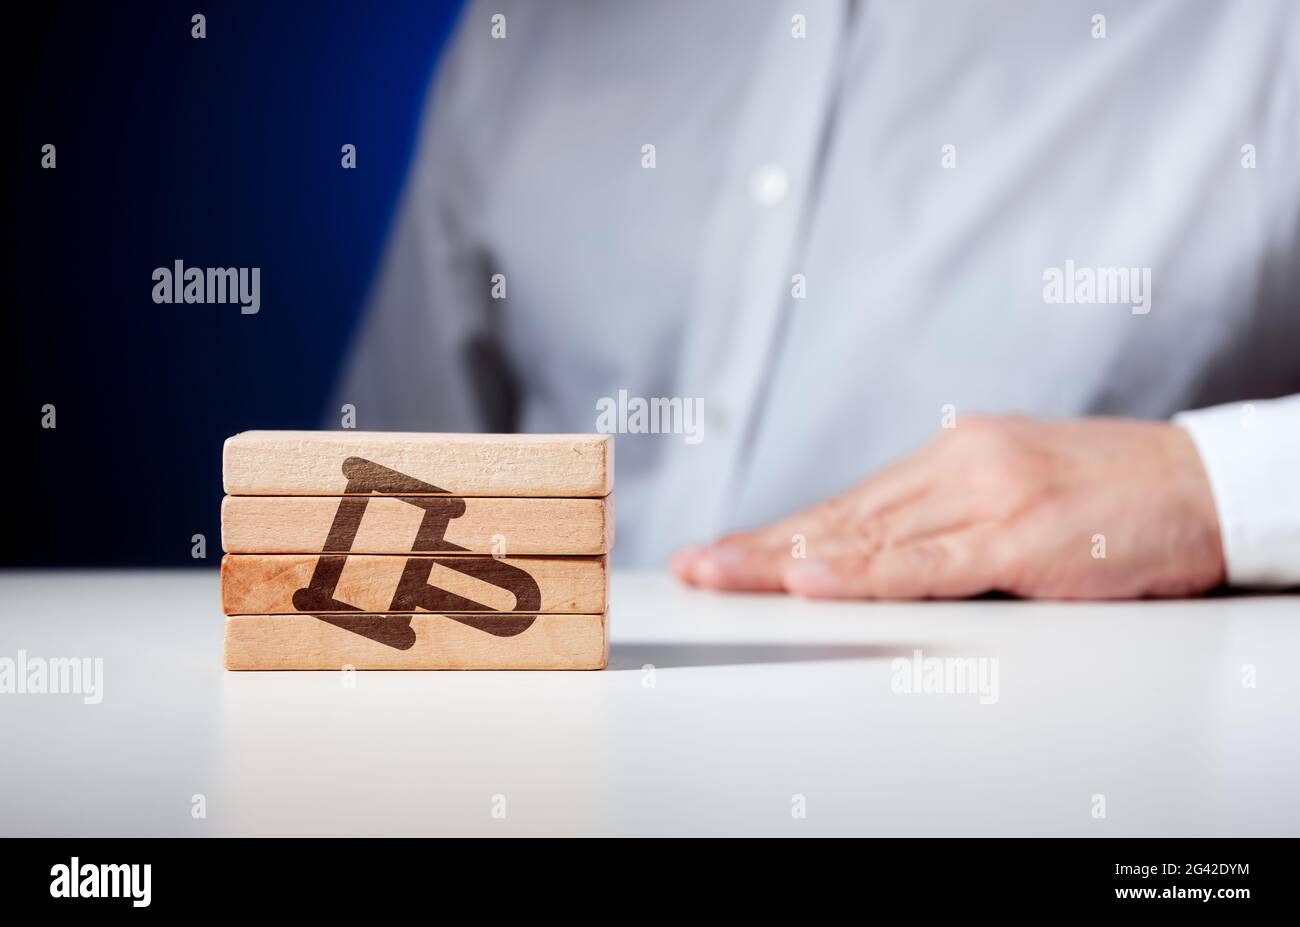 Gavel symbol carved on wooden blocks with a man sitting at the background. Law, justice or auction concept. Stock Photo